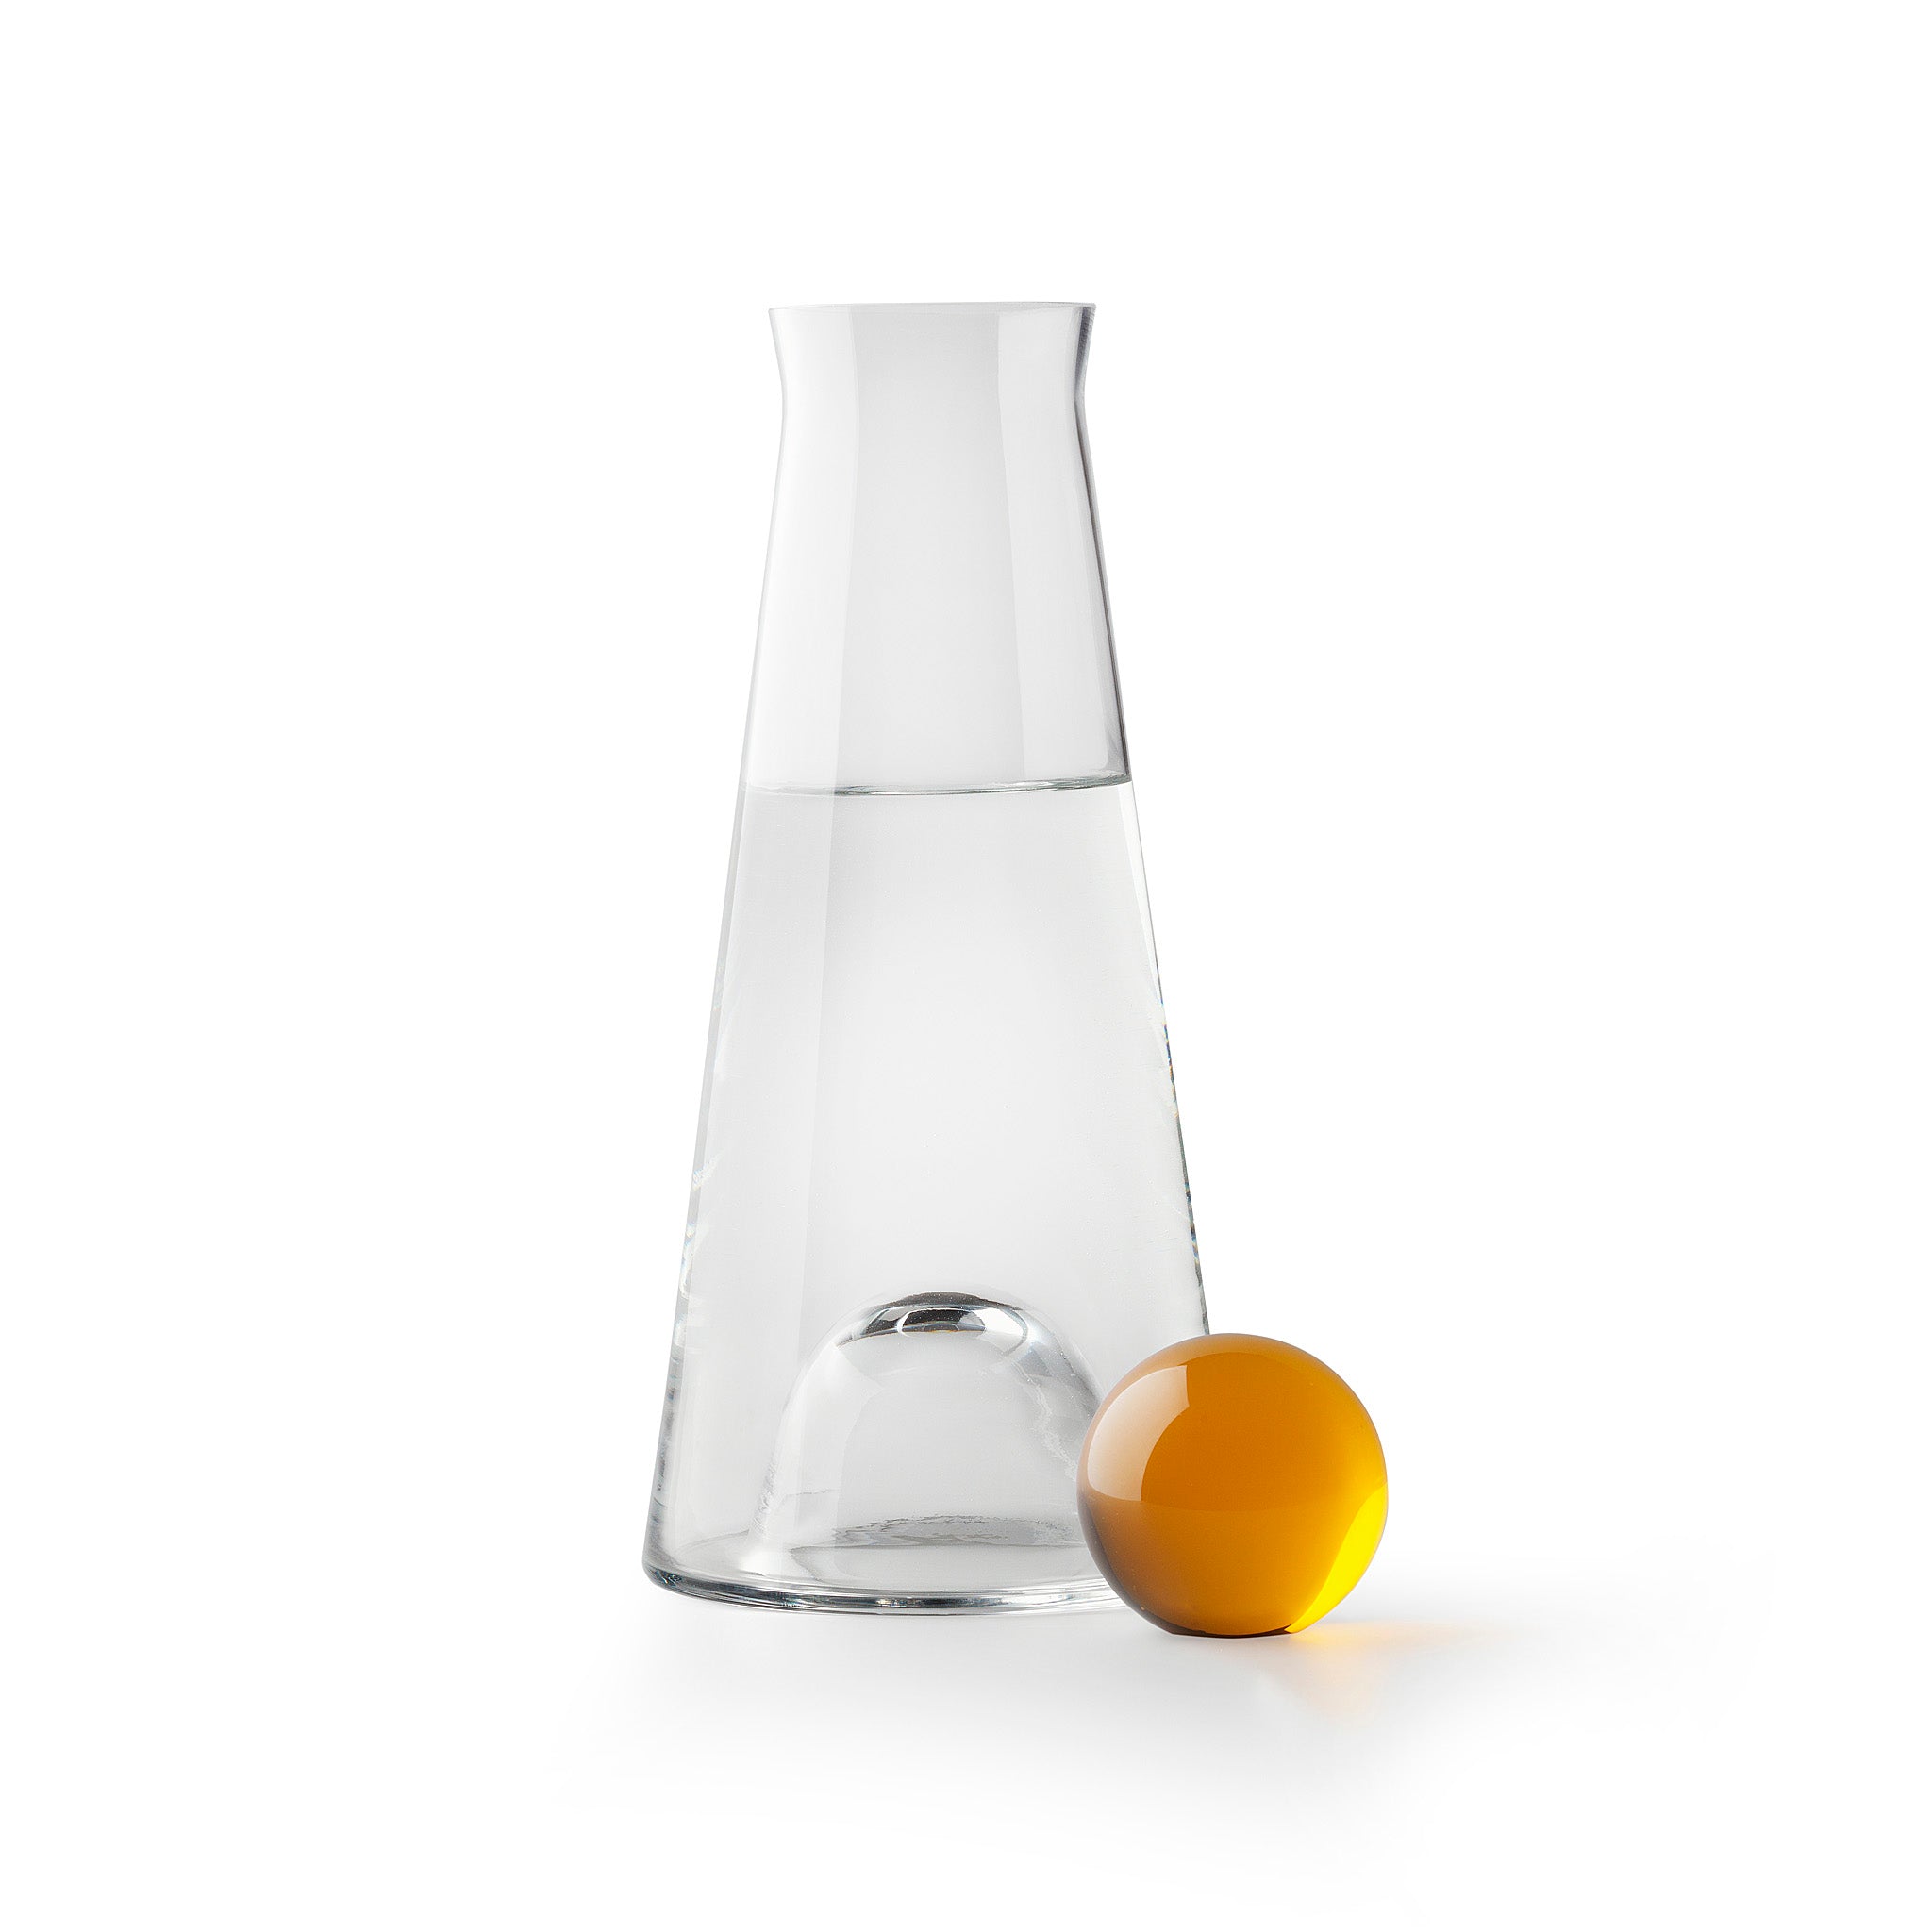 Fia Carafe by Nina Jobs for Design House Stockholm. Wine. Water. Oil. Vinegar. Indispensable on any table, and always in need of a proper presentation. Preferably made in glassware.